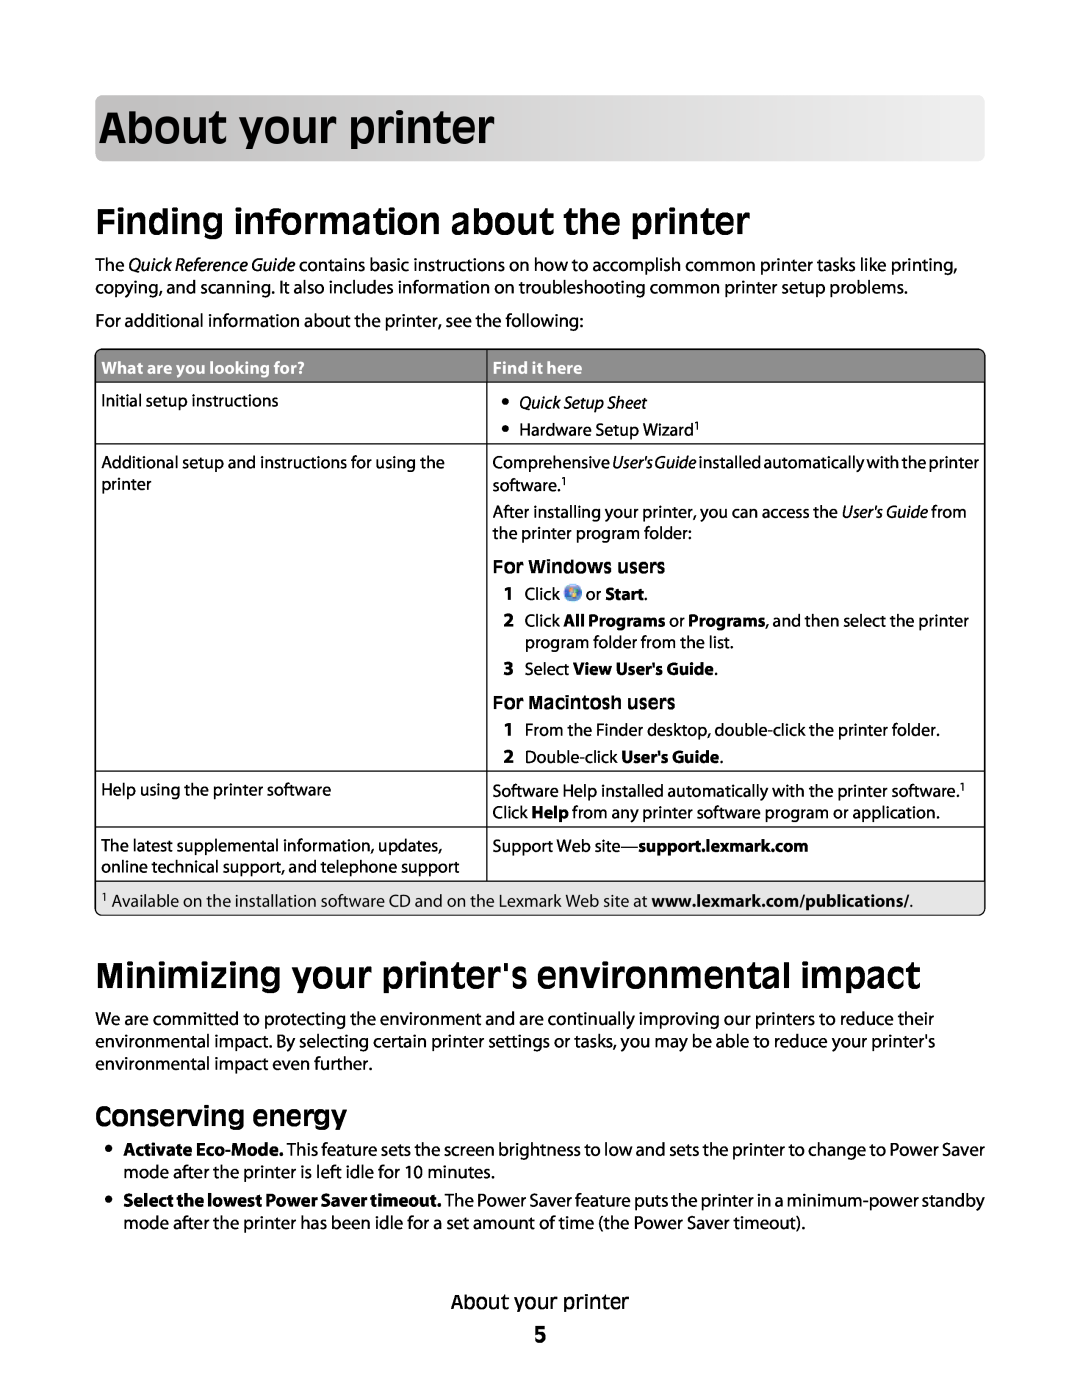 Lexmark Pro207 About your printer, Finding information about the printer, Minimizing your printers environmental impact 